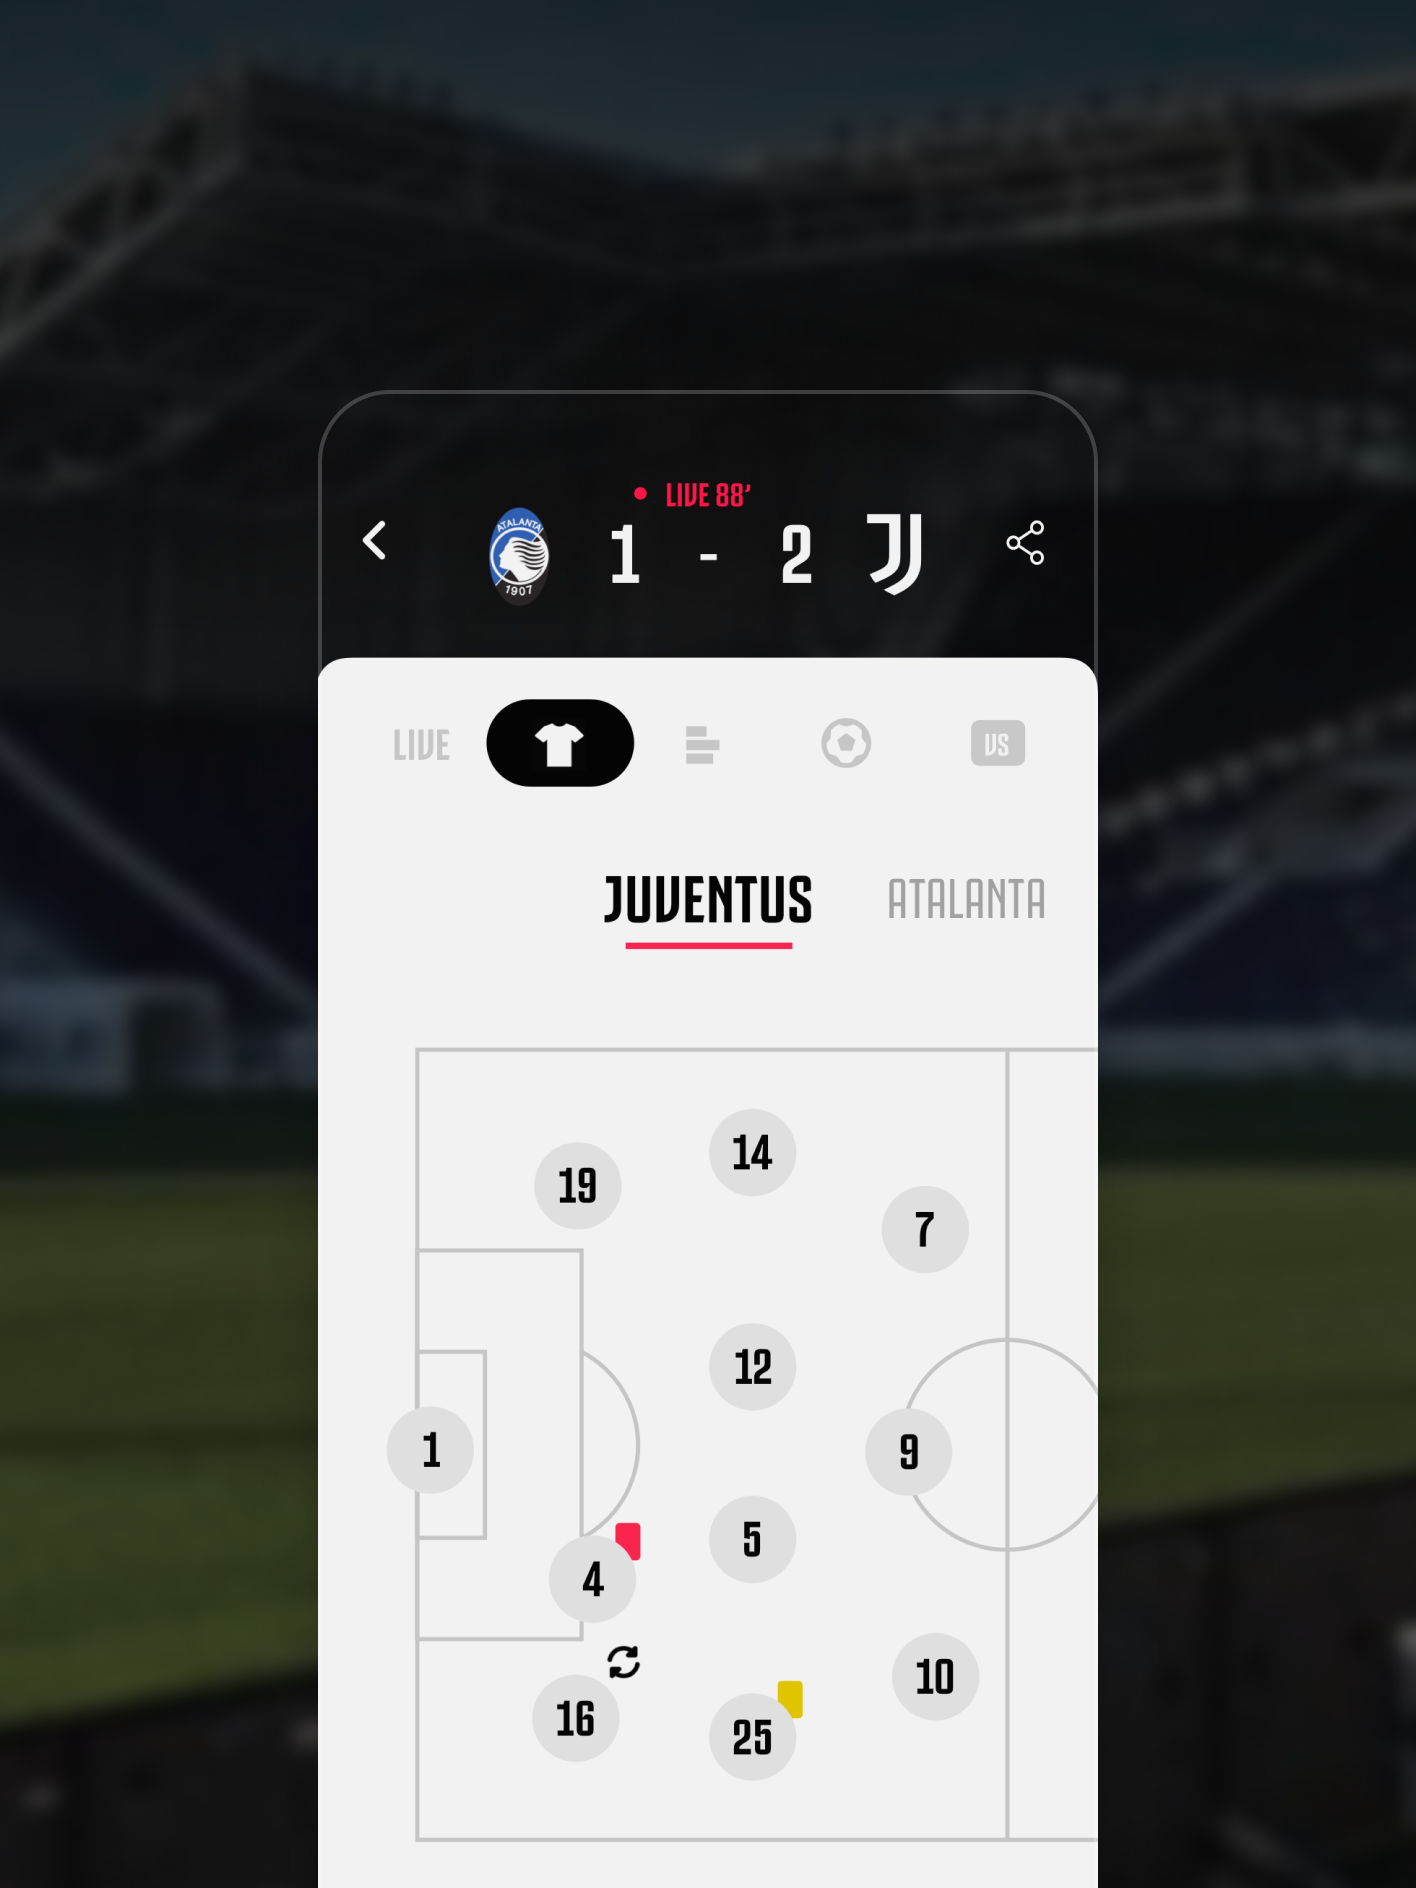 Mobile screen showing the player schema inside the soccer field